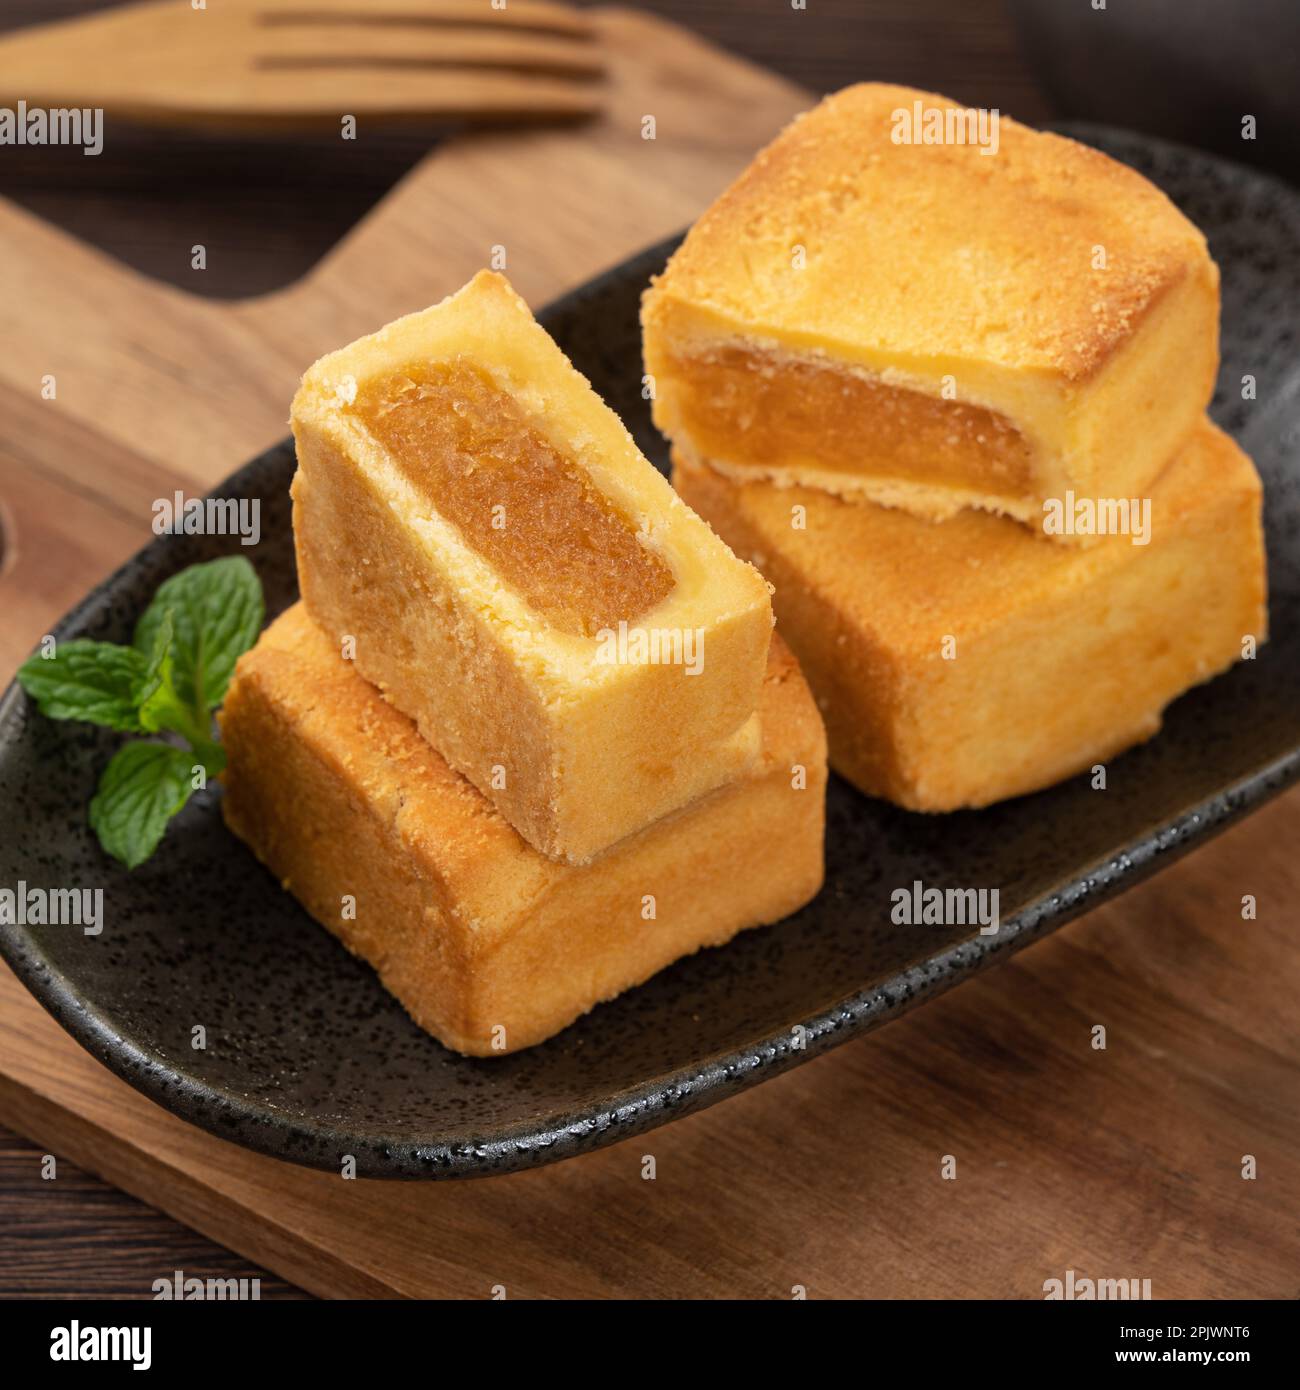 Delicious Taiwanese pineapple cake pastry dessert in a plate on wooden table background with hot tea. Stock Photo